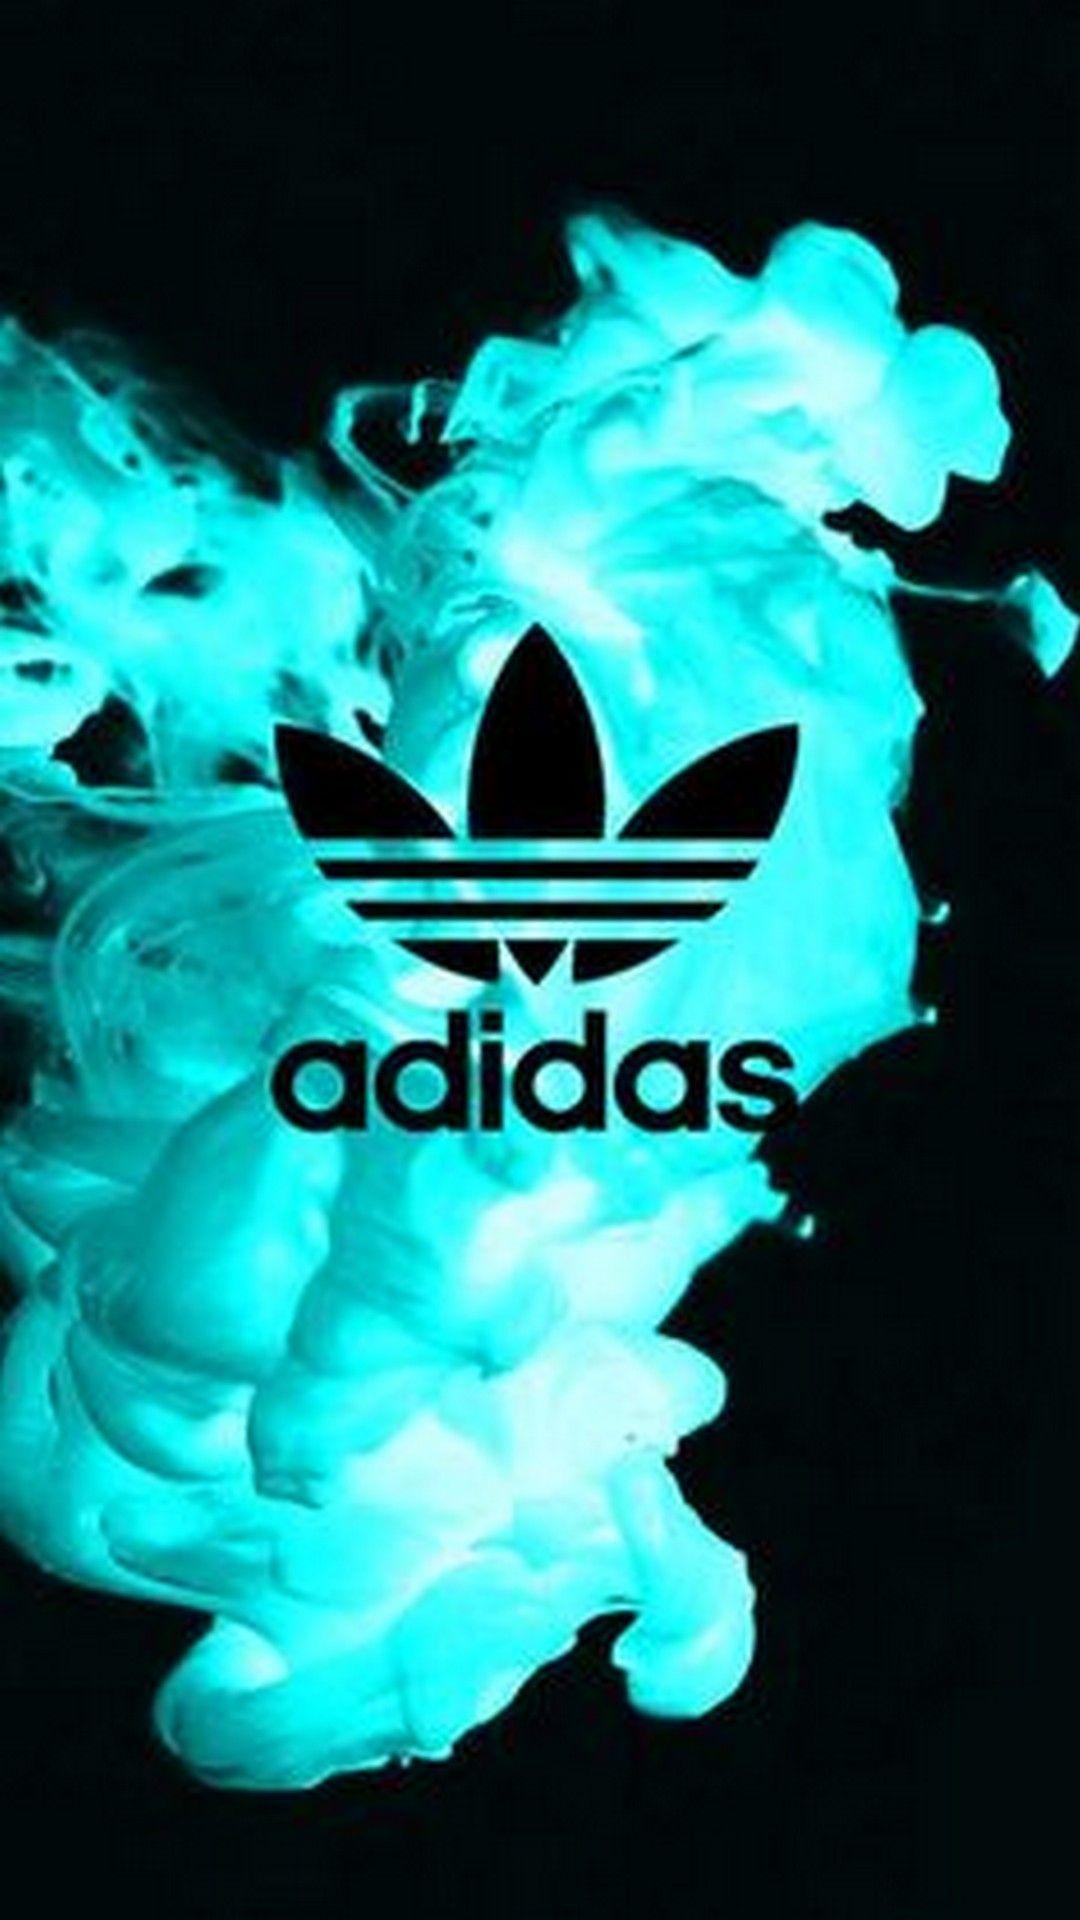 Adidas Aesthetic Wallpapers Wallpaper Cave